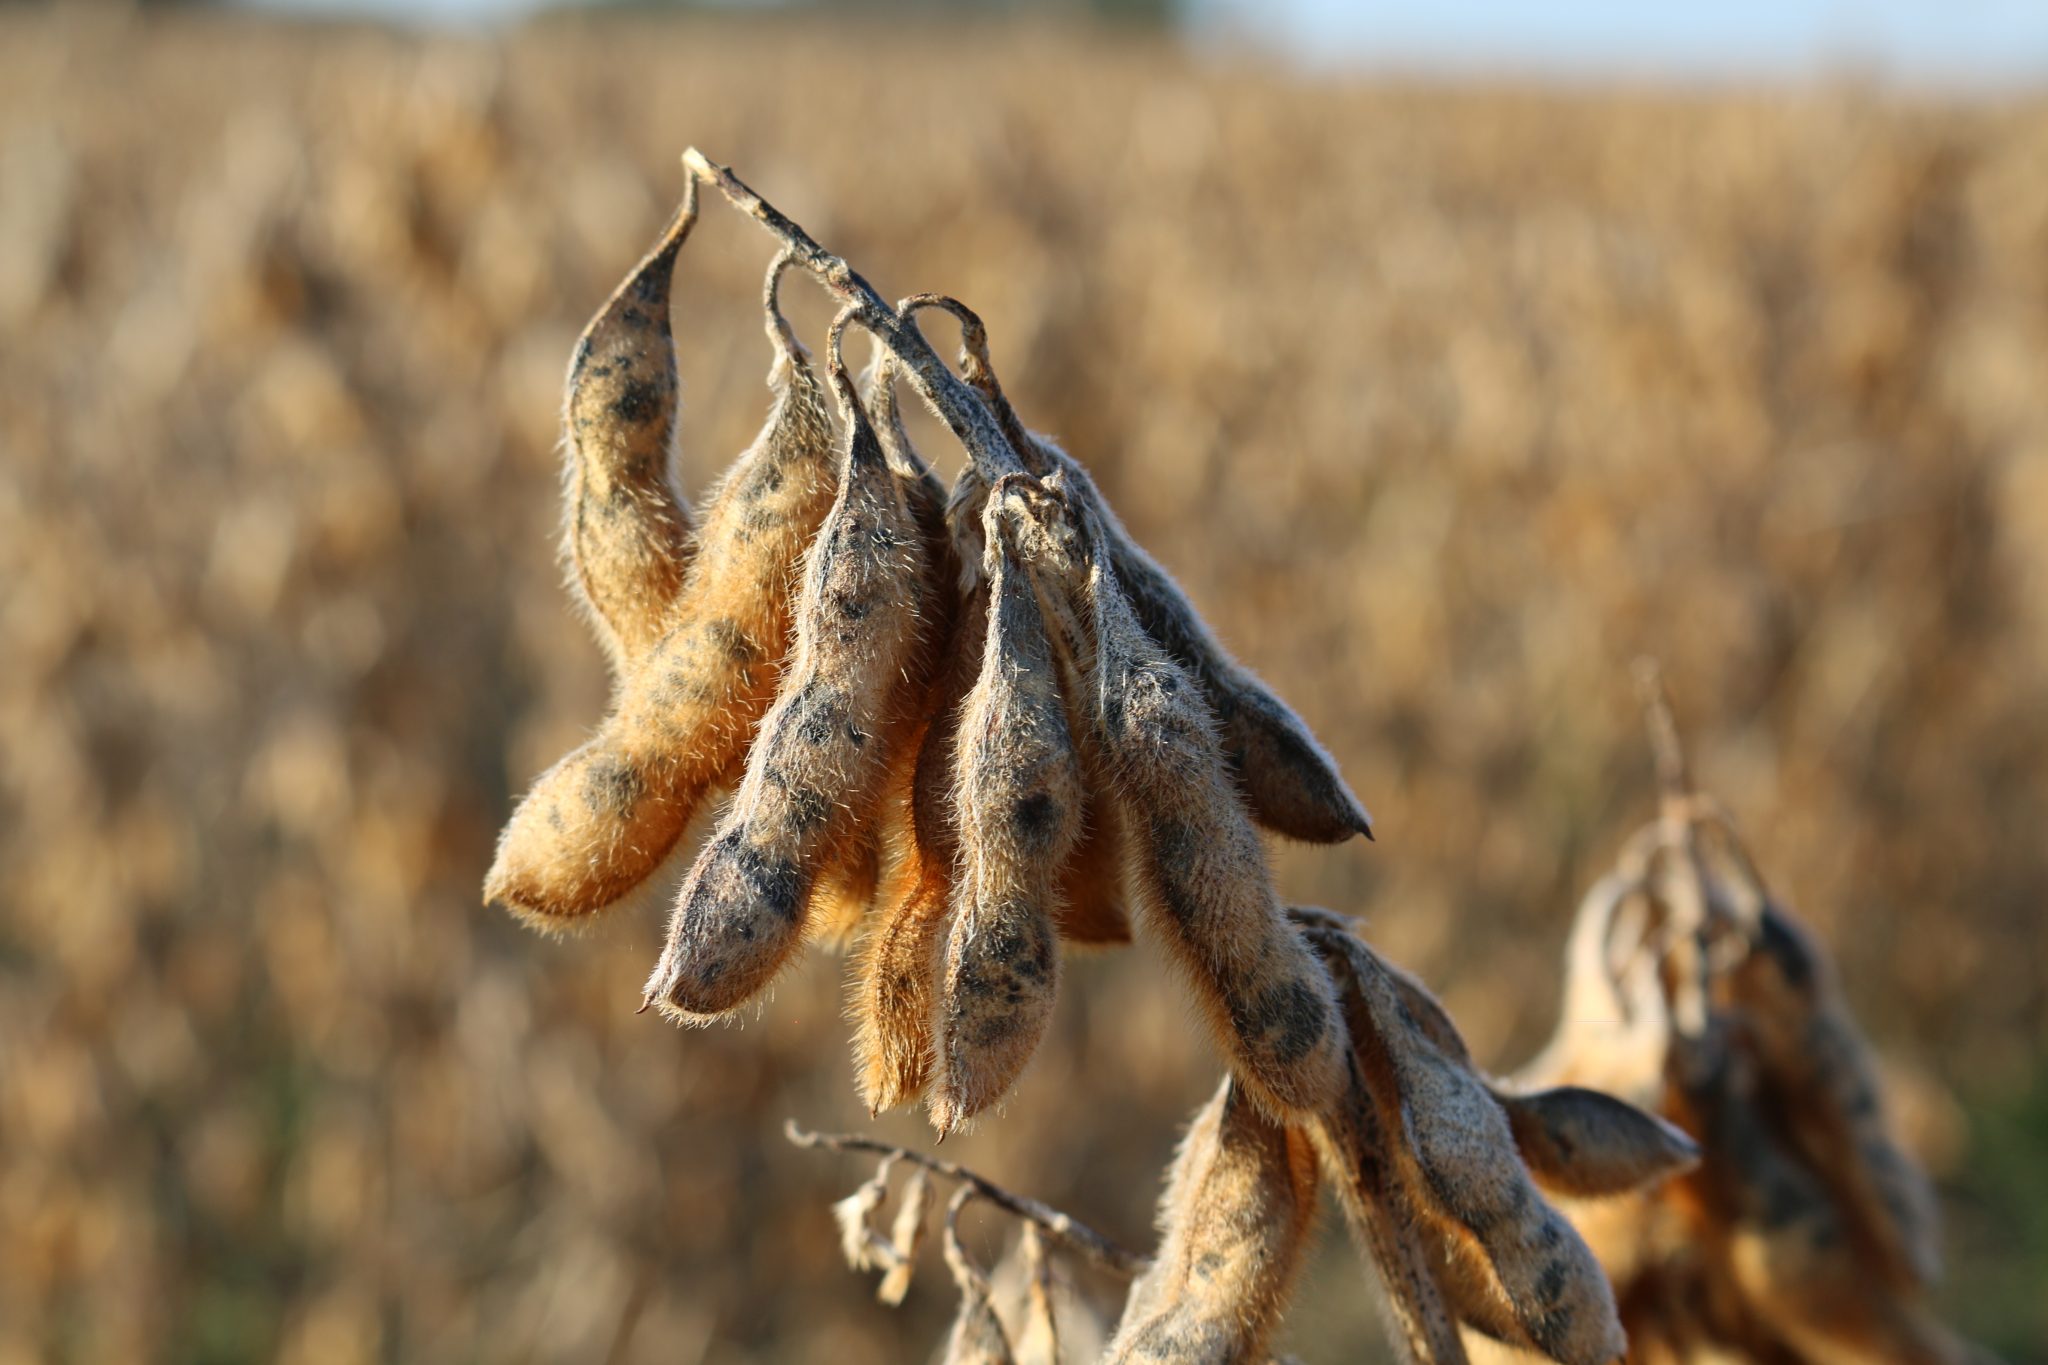 dried soybean pods ready for harvest